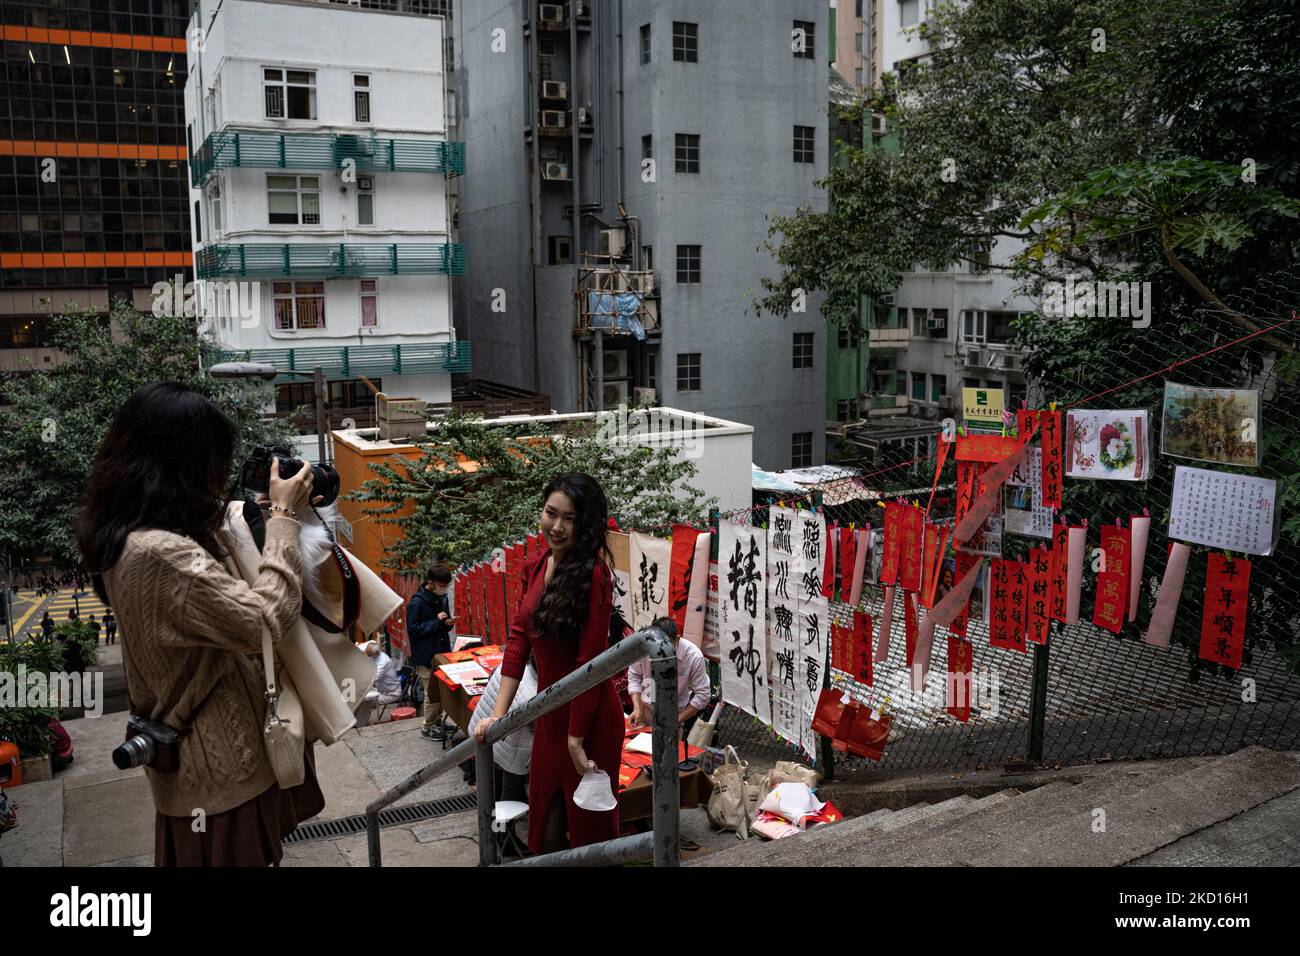 On January 24, 2022, Hong Kong, on the eve of the Chinese New Year in Hong Kong, some calligraphers wrote lucky messages on the street, and some citizens took pictures. (Photo by Leung Man Hei/NurPhoto) Stock Photo